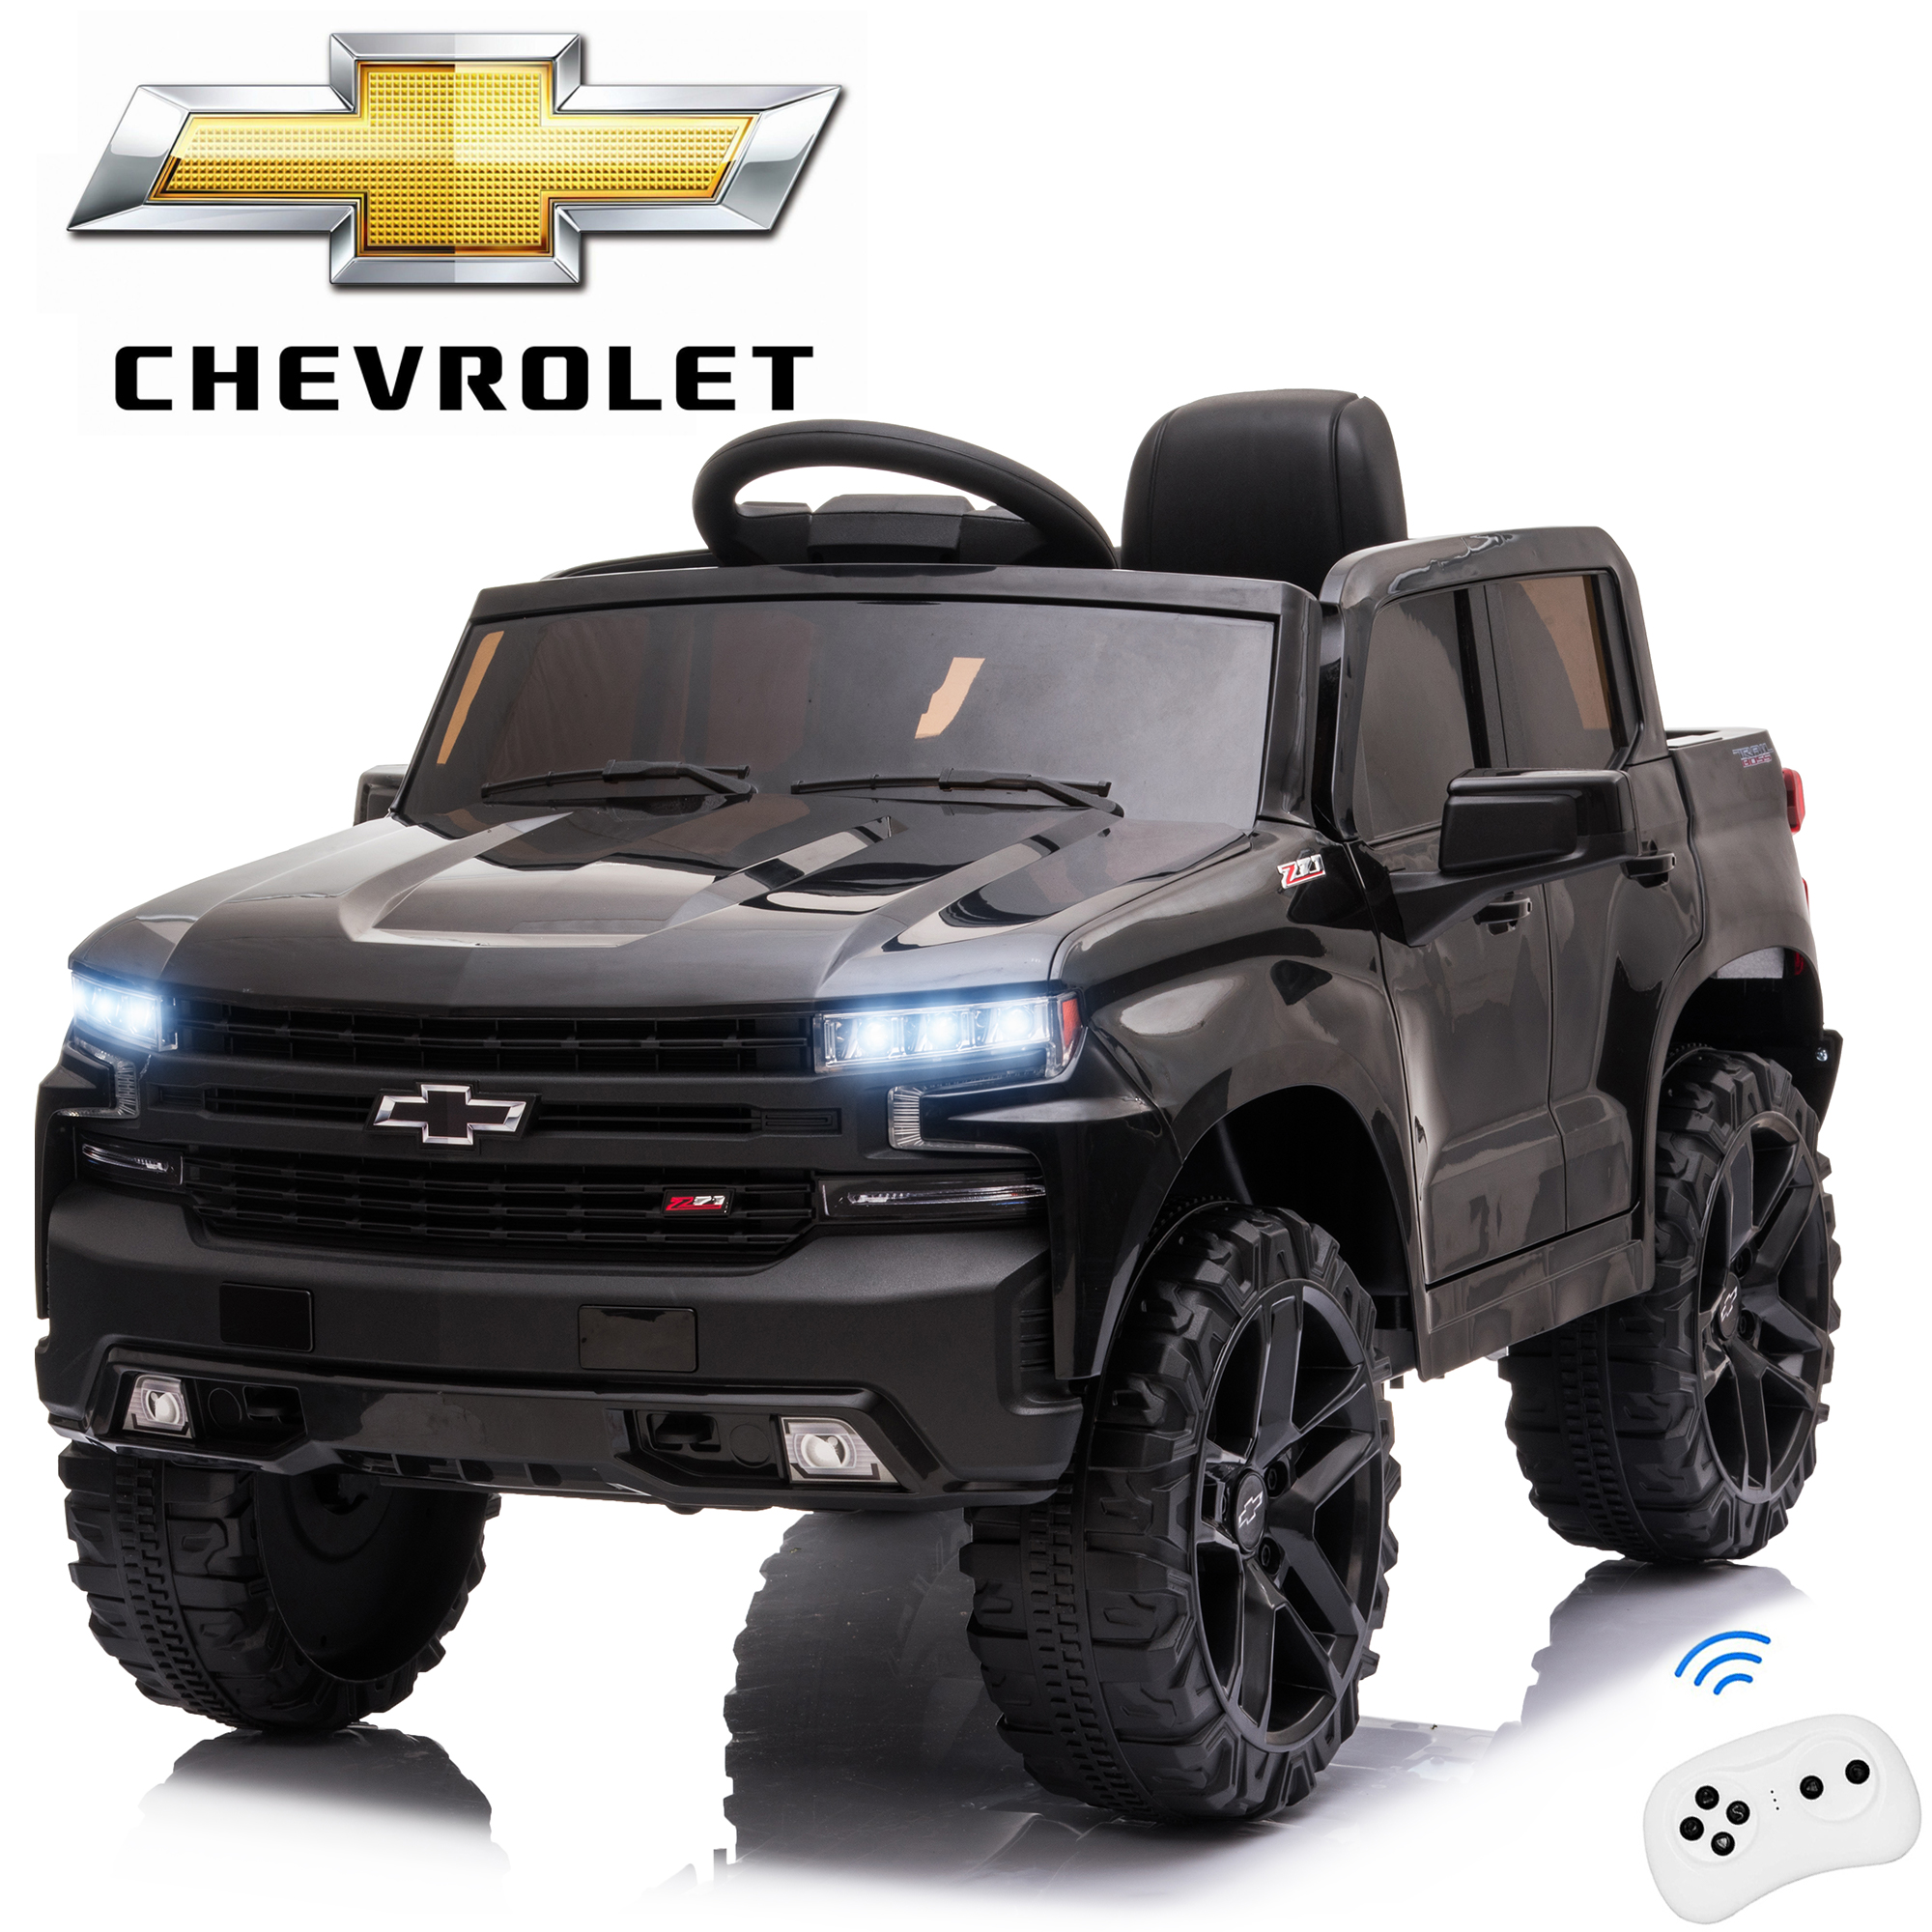 Official Licensed Chevrolet Ride On Car, 12V Ride-On Truck Toy for Kids, Electric 4 Wheels Kids Toy w/Parent Remote Control, Foot Pedal, MP3 Player, 2 Speeds, Ages 3-5 Years - image 8 of 9